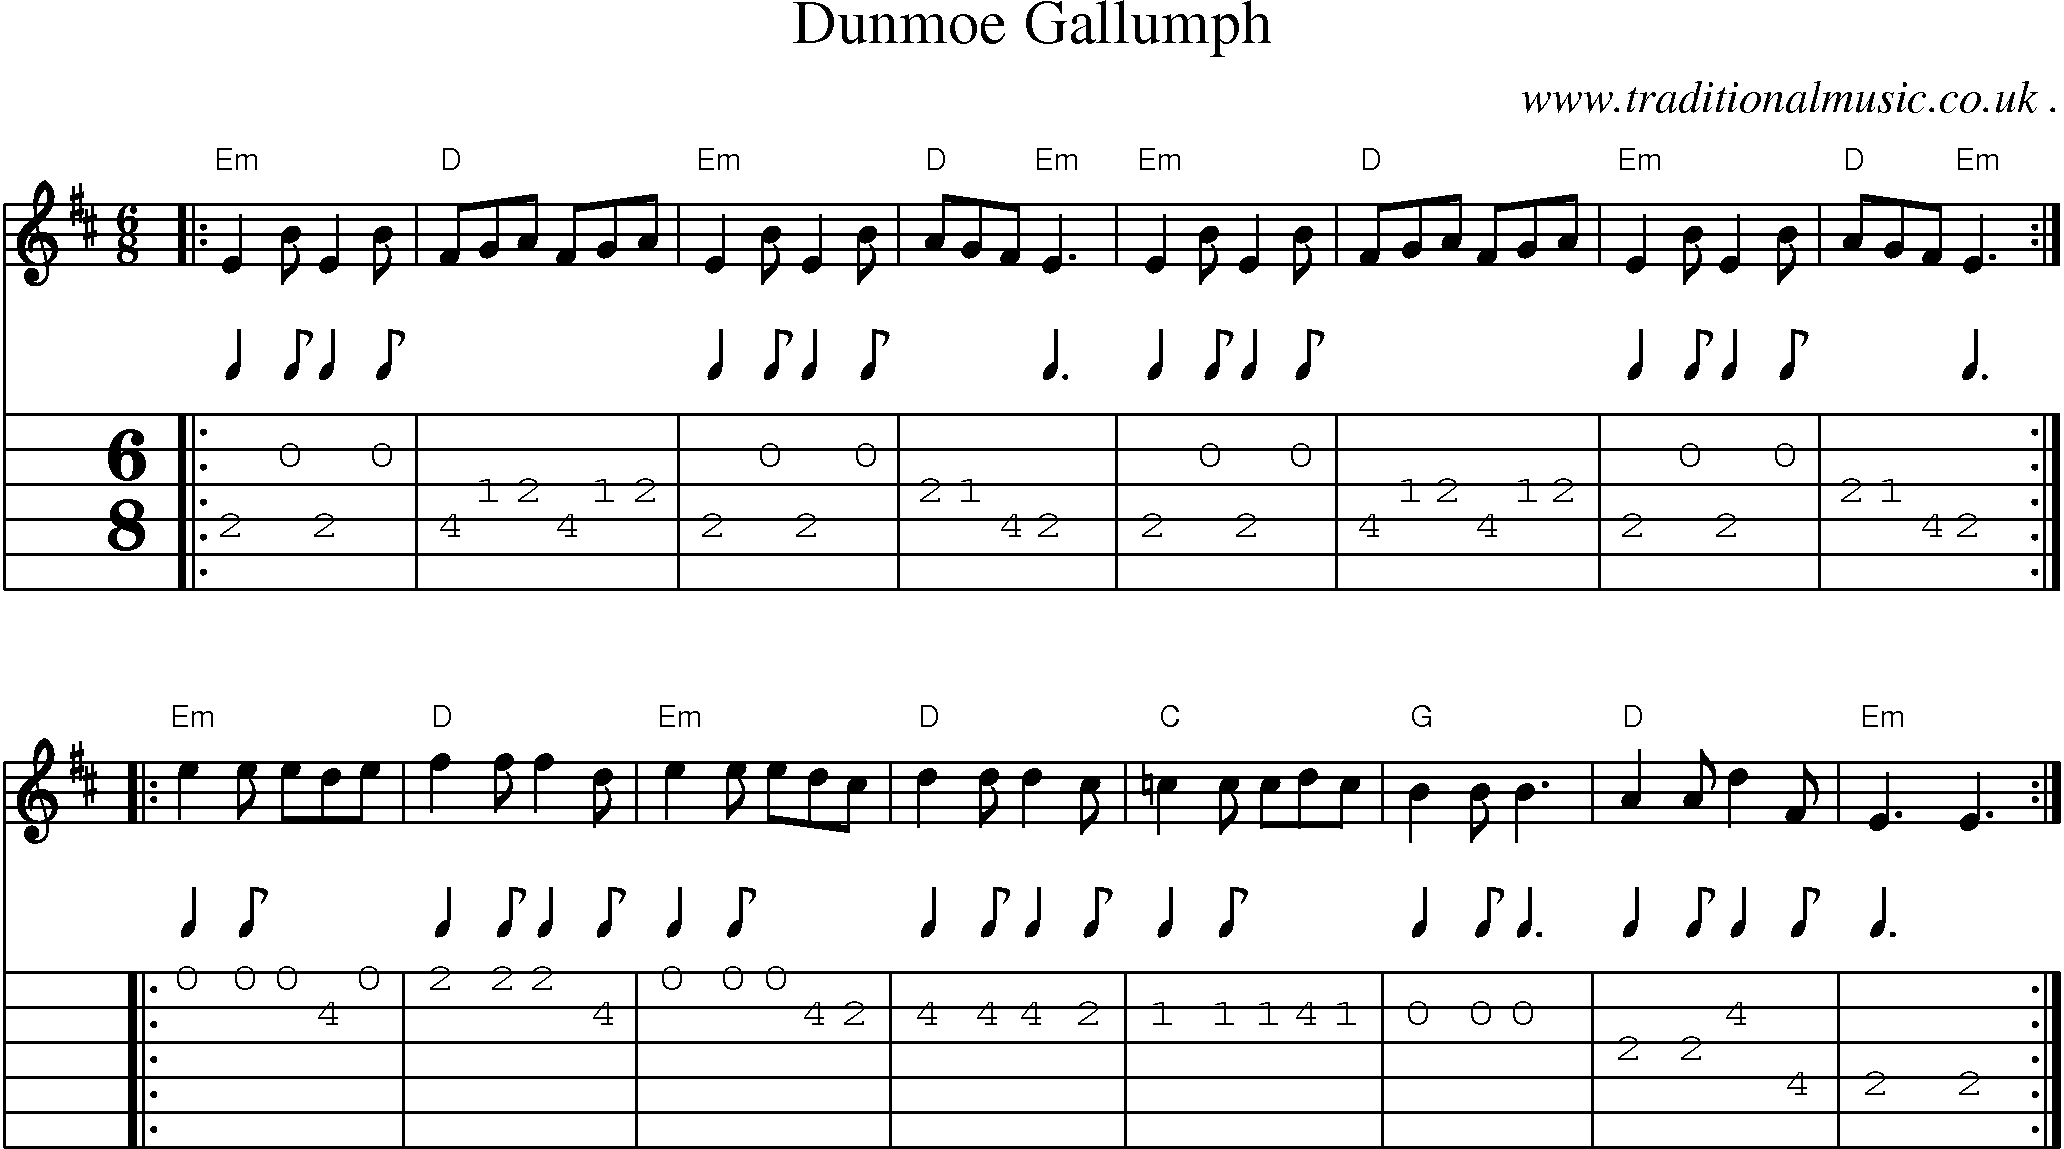 Sheet-music  score, Chords and Guitar Tabs for Dunmoe Gallumph